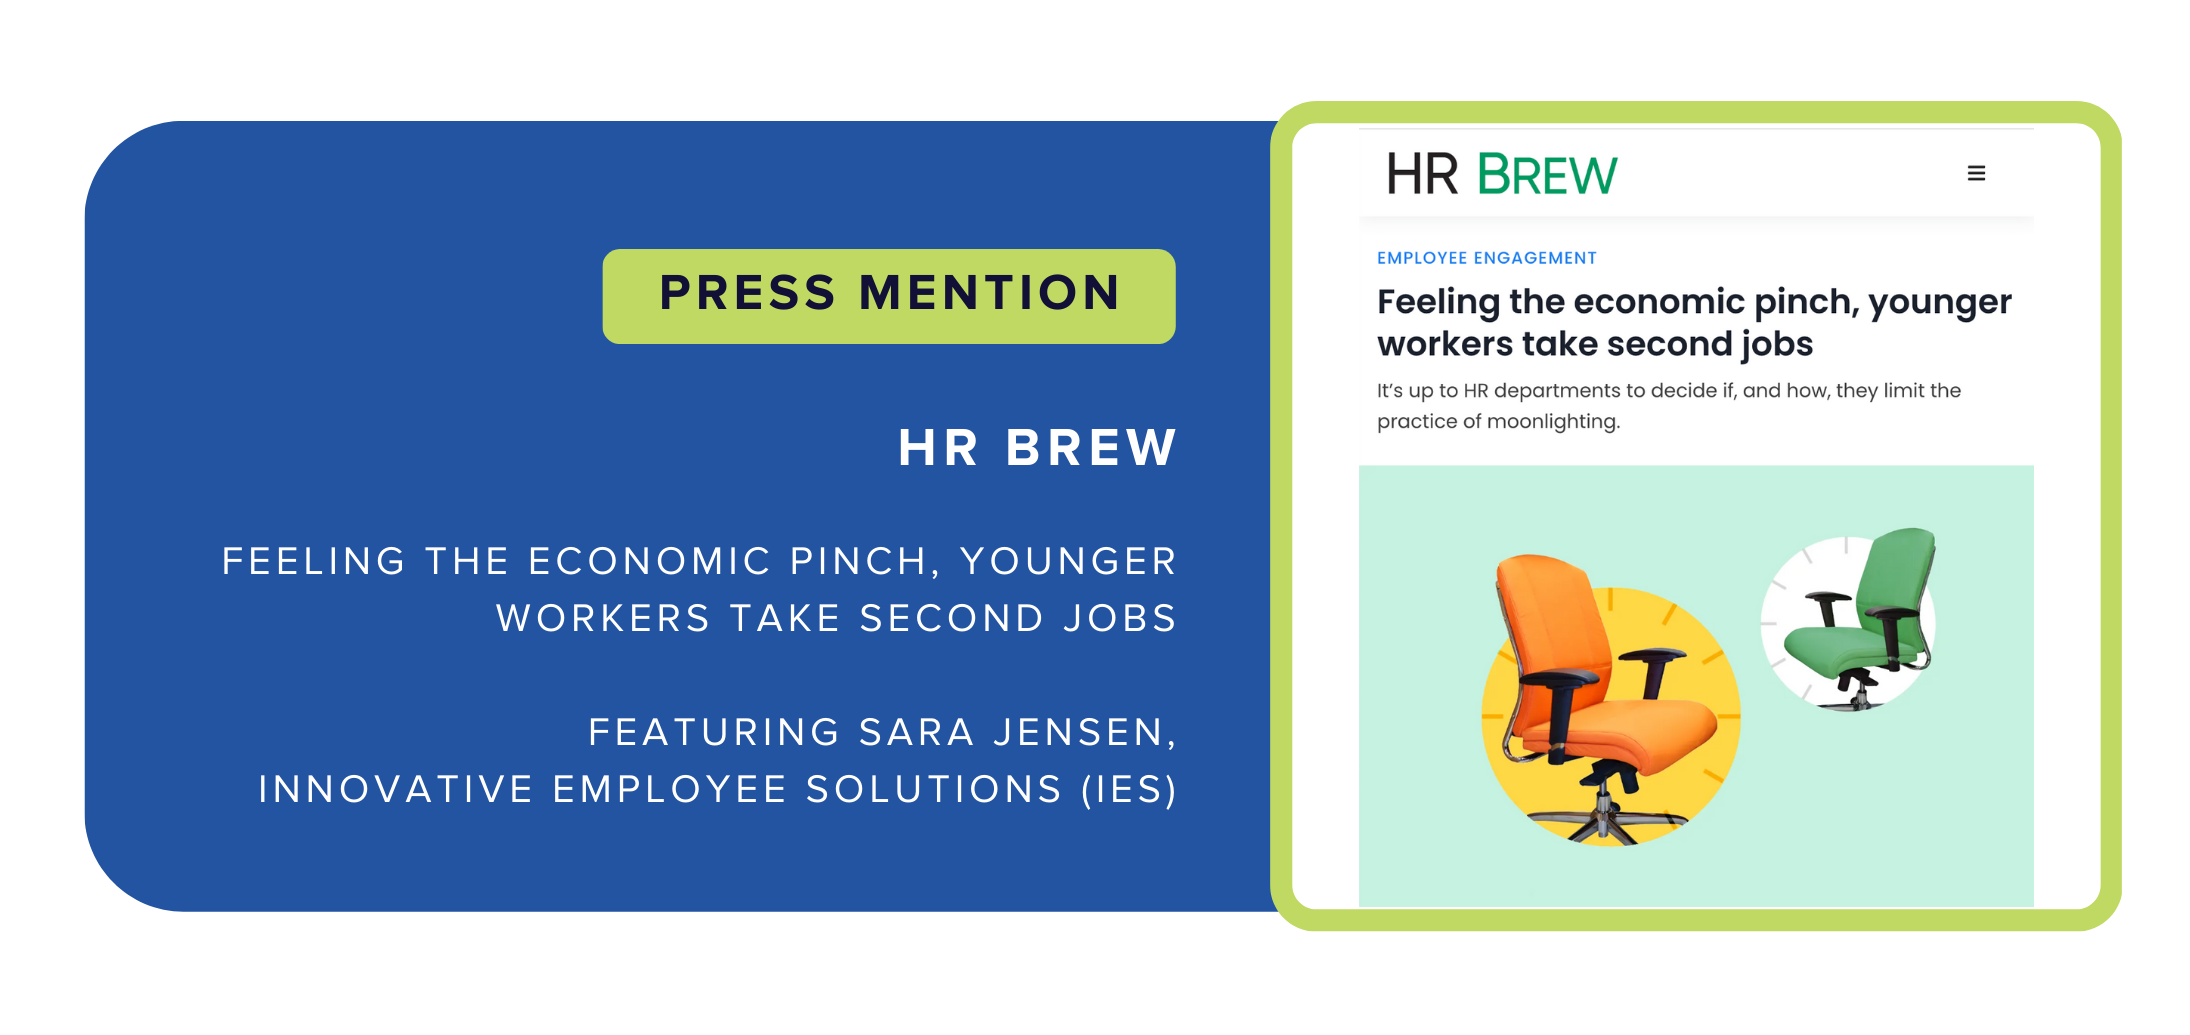 Press Mention in HR Brew: "Feeling the economic pinch, younger workers take second jobs" featuring Sara Jensen, IES